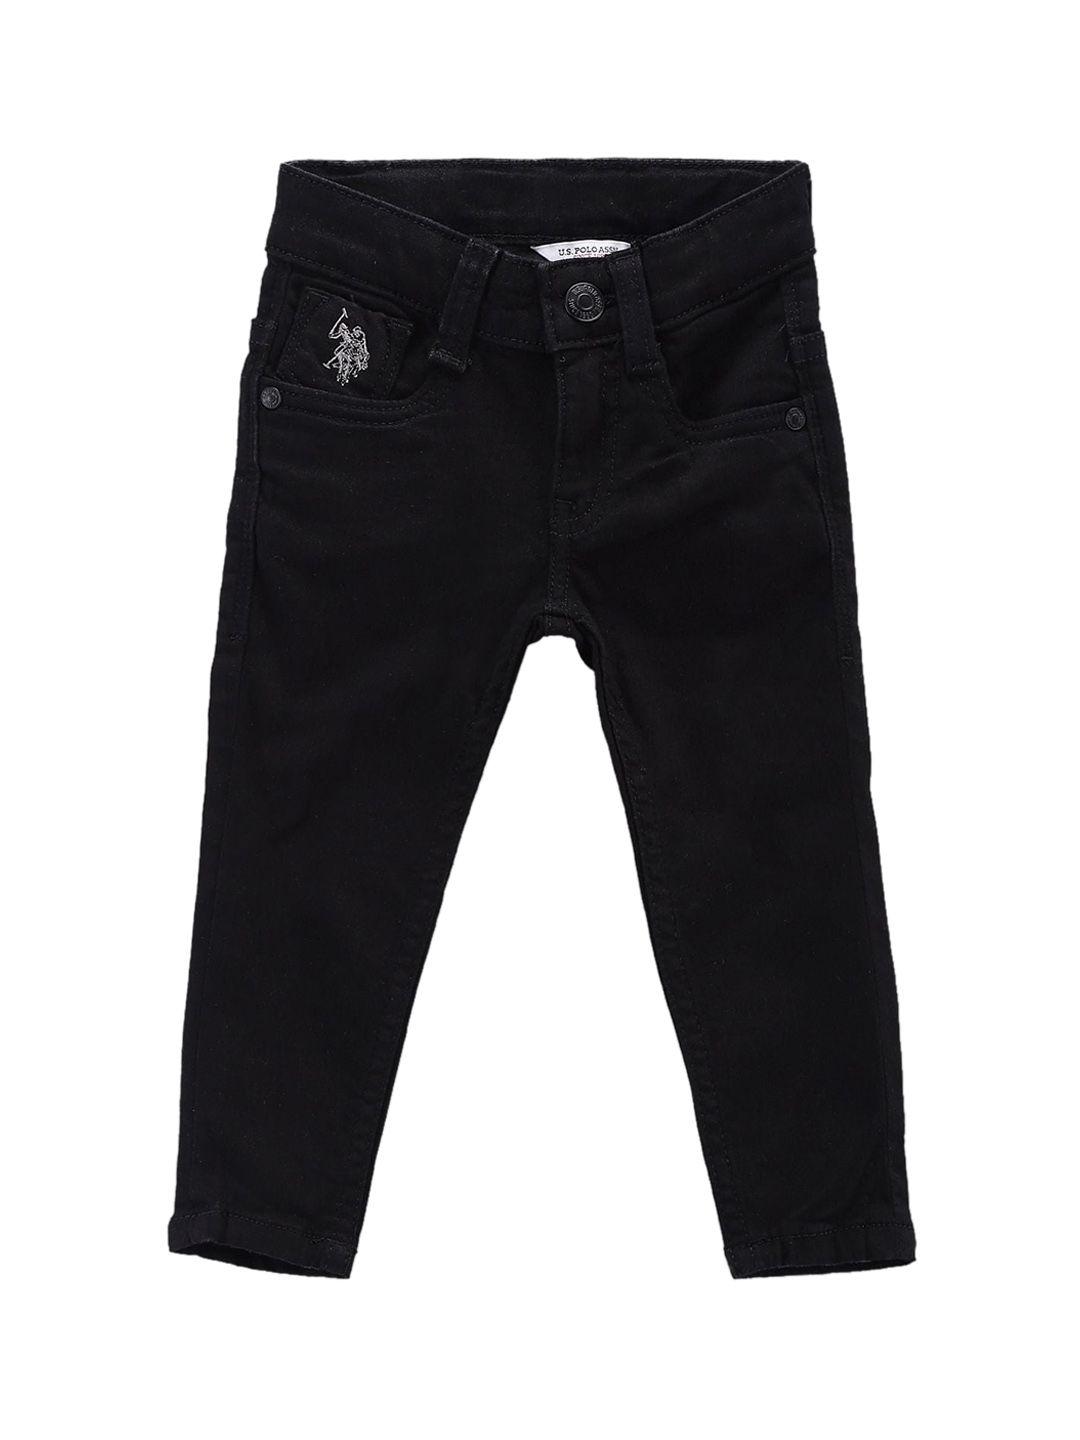 u.s. polo assn. kids boys skinny fit clean look stretchable jeans